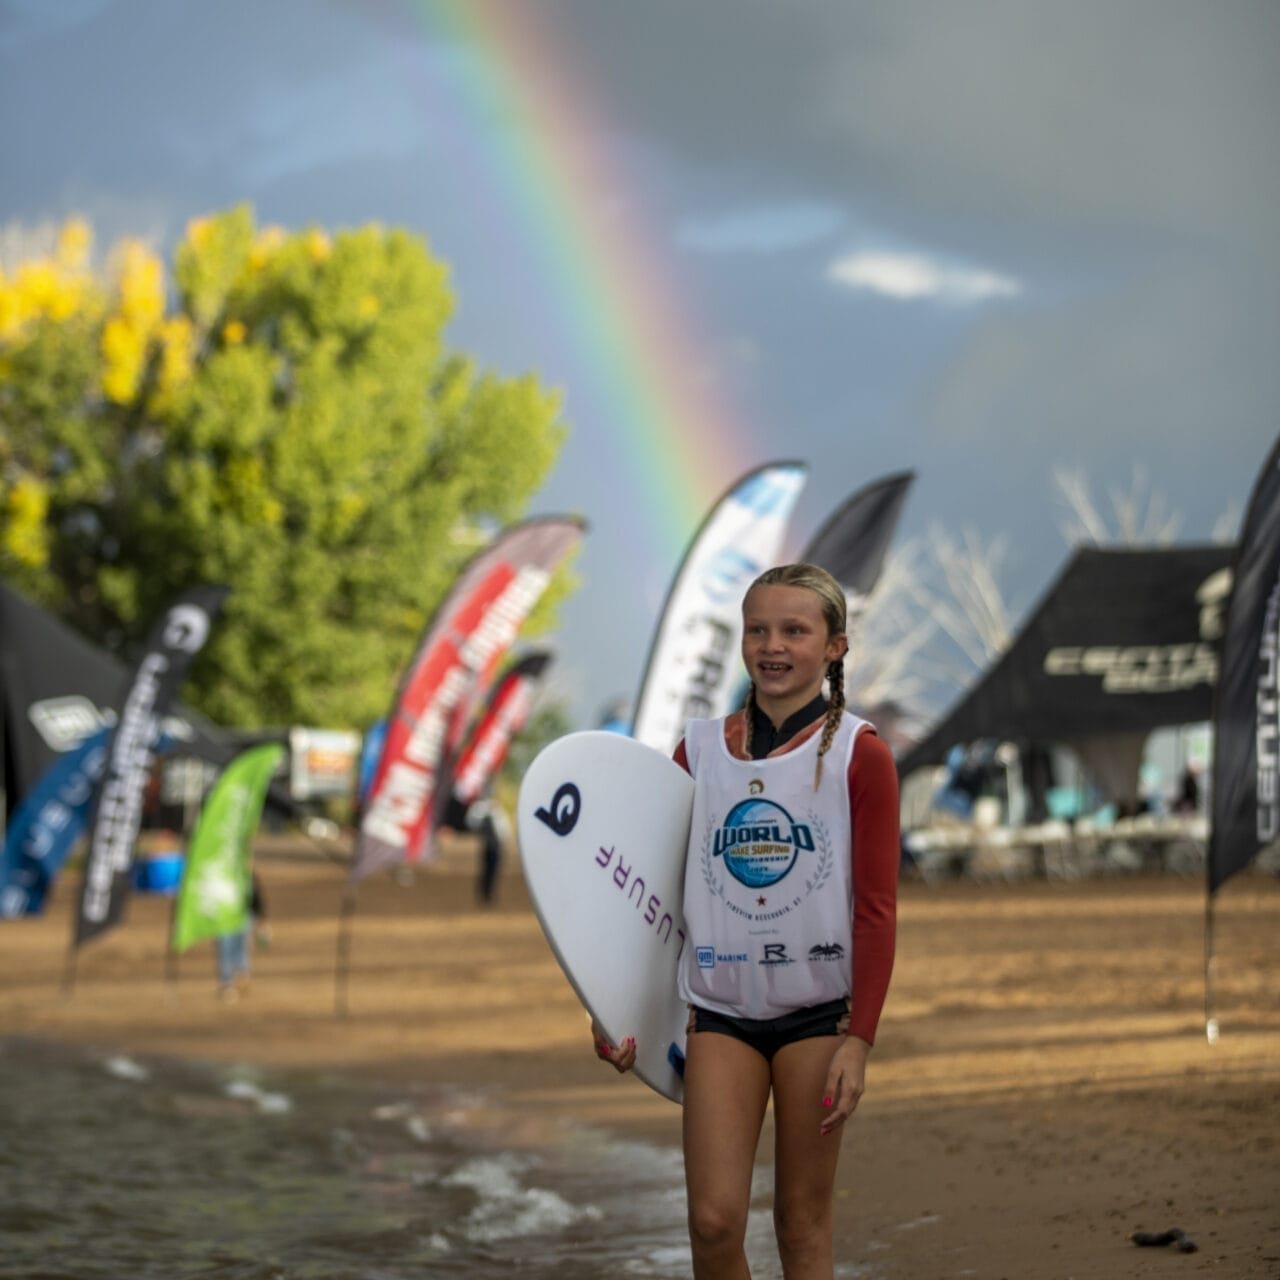 Kenzie Hickey, a girl, holding a surfboard in the water with a rainbow in the background.